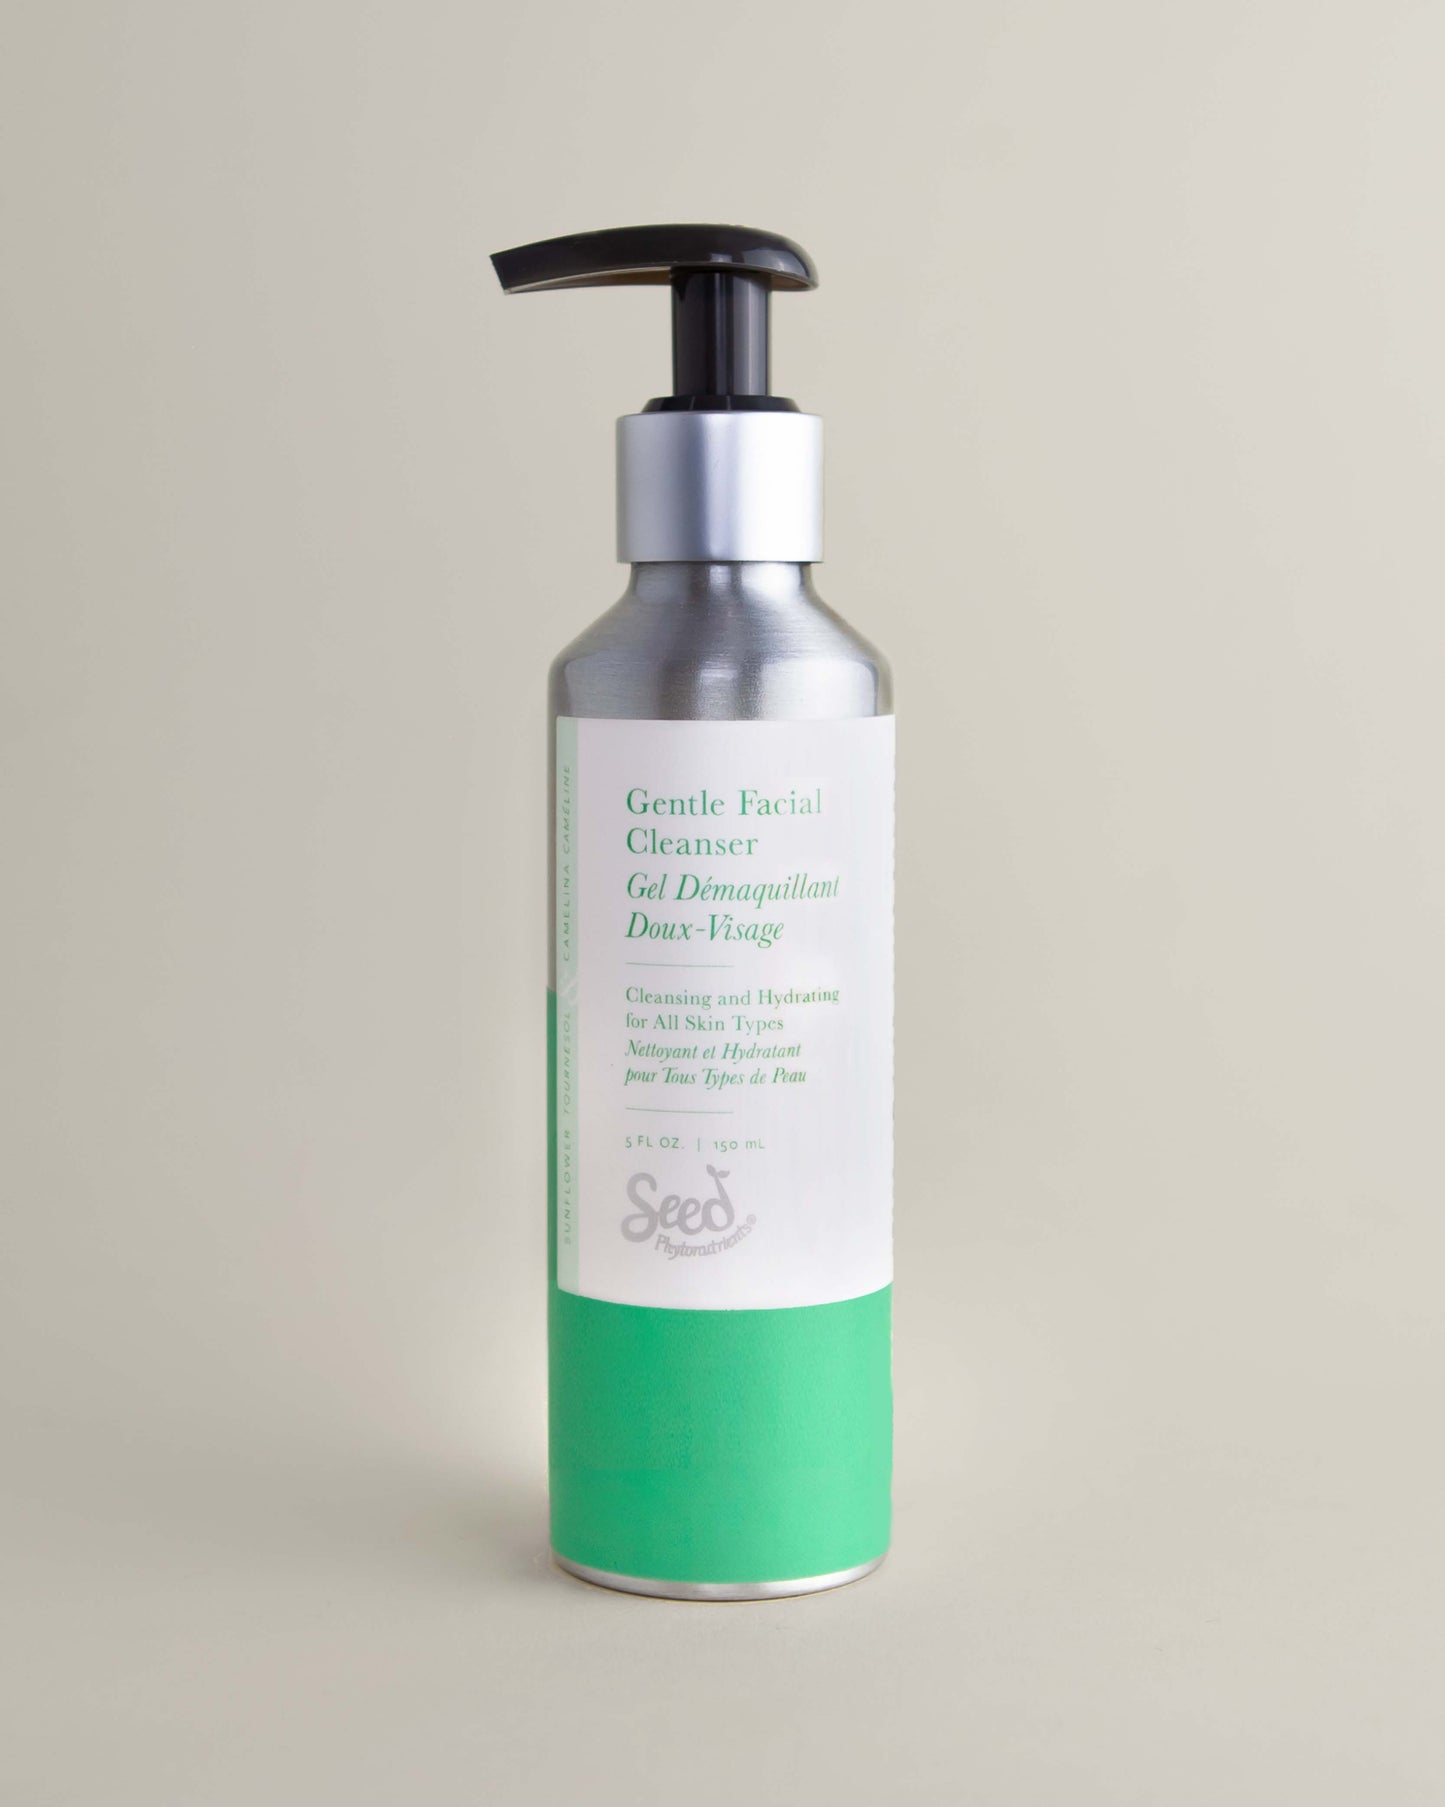 Seed Phytonutrients - Seed Gentle Facial Cleanser